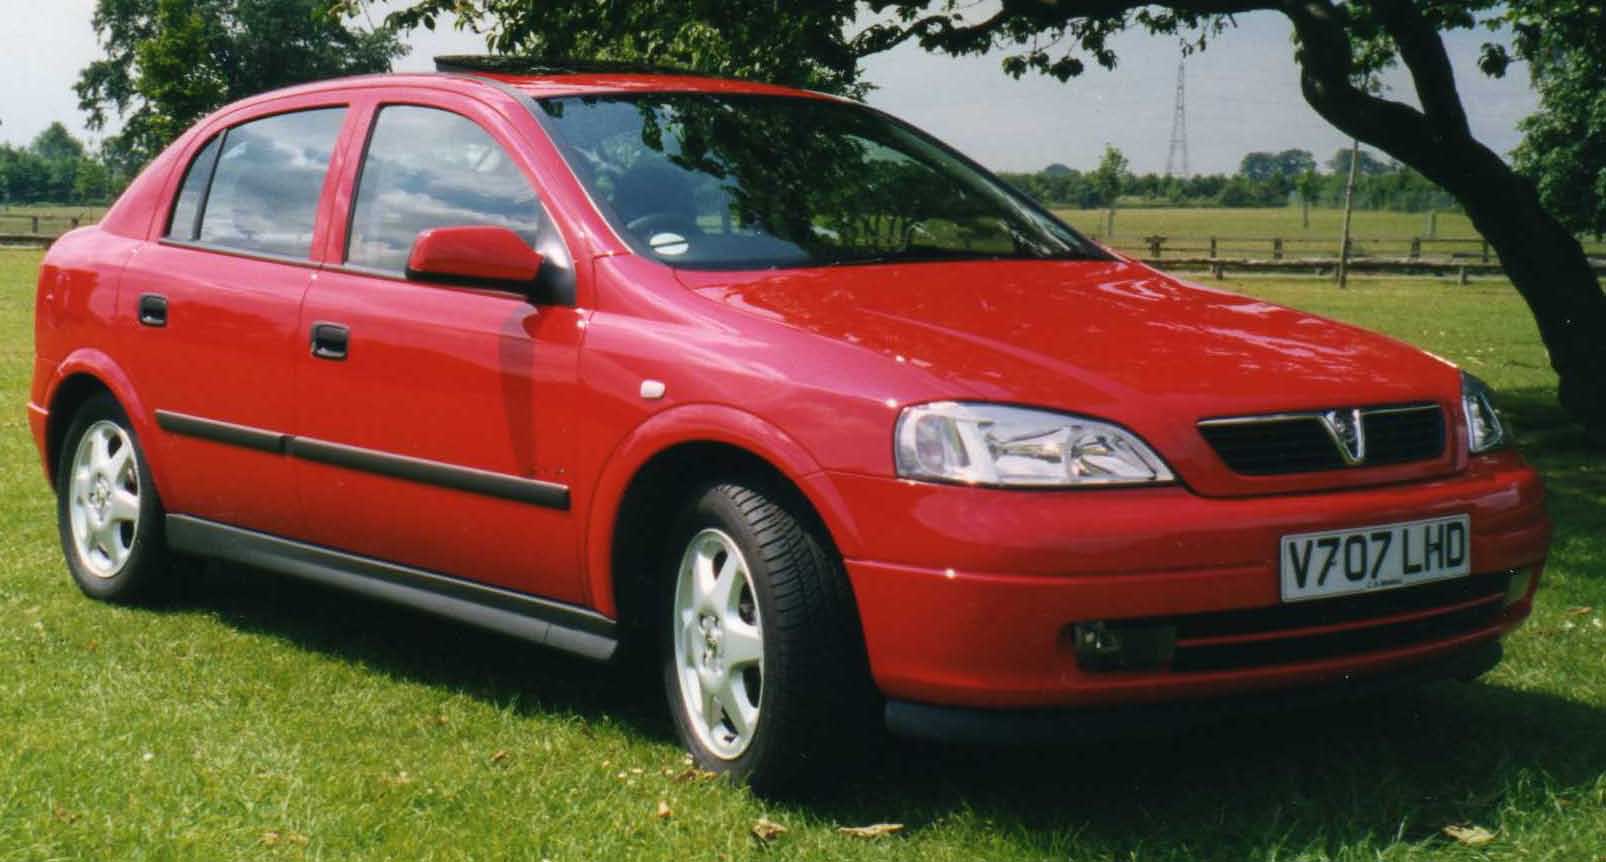 LHD Vauxhall car with the best models